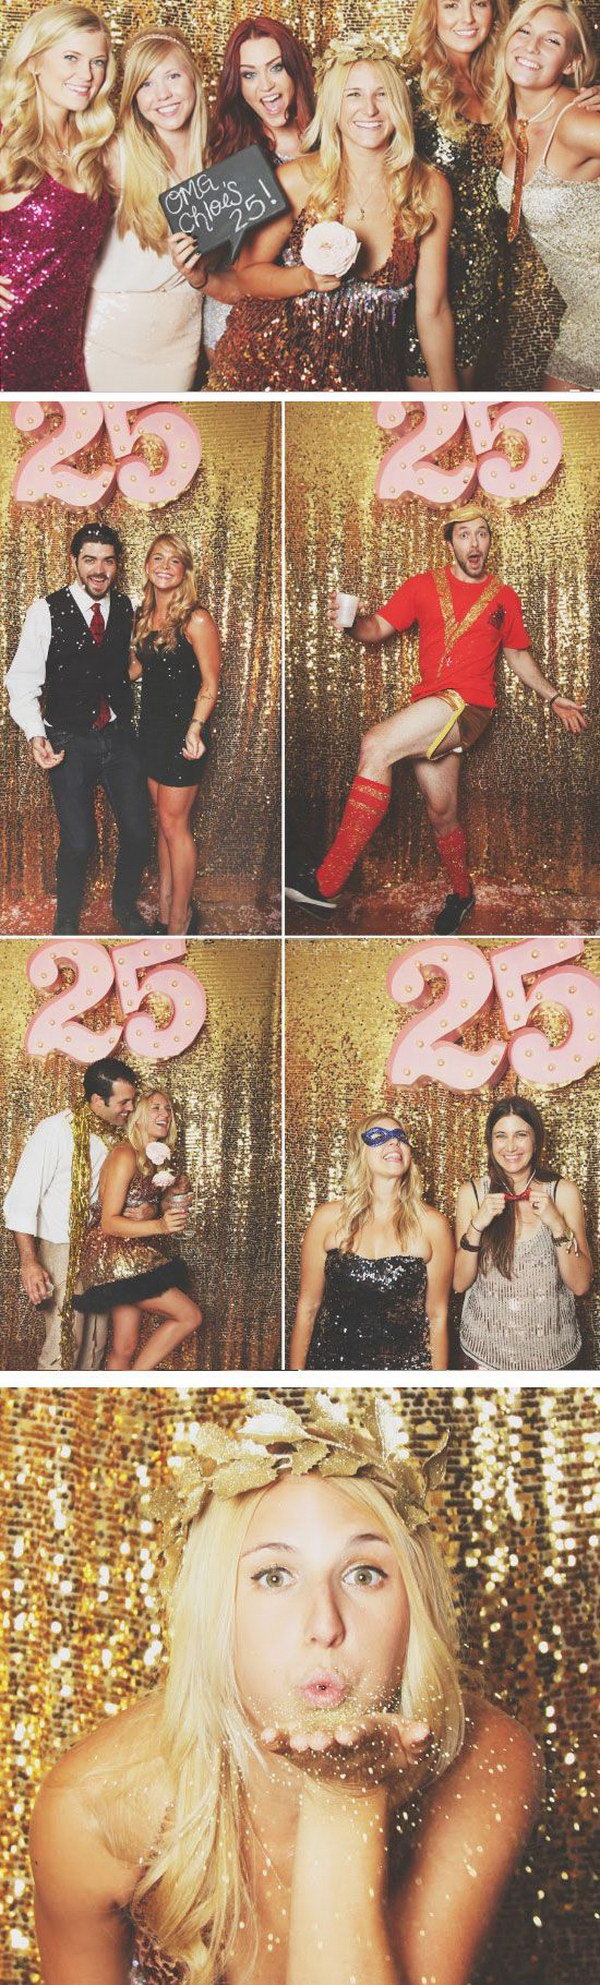 DIY Gold Sequin Photo Booth Backdrop 